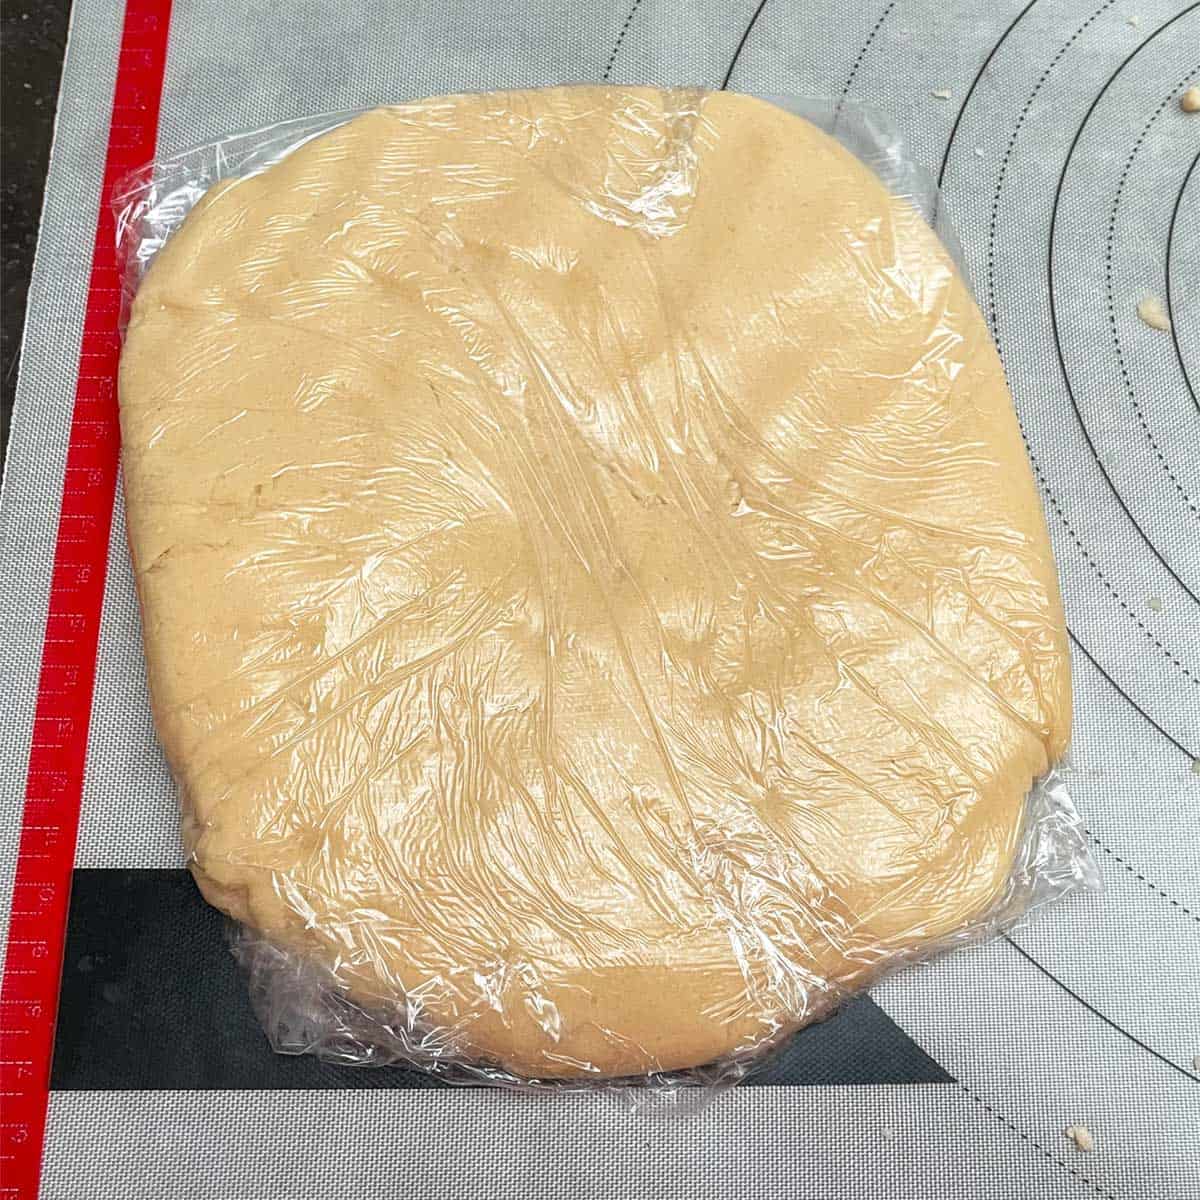 Half the cookie dough flattened to a disk and wrapped in plastic wrap.